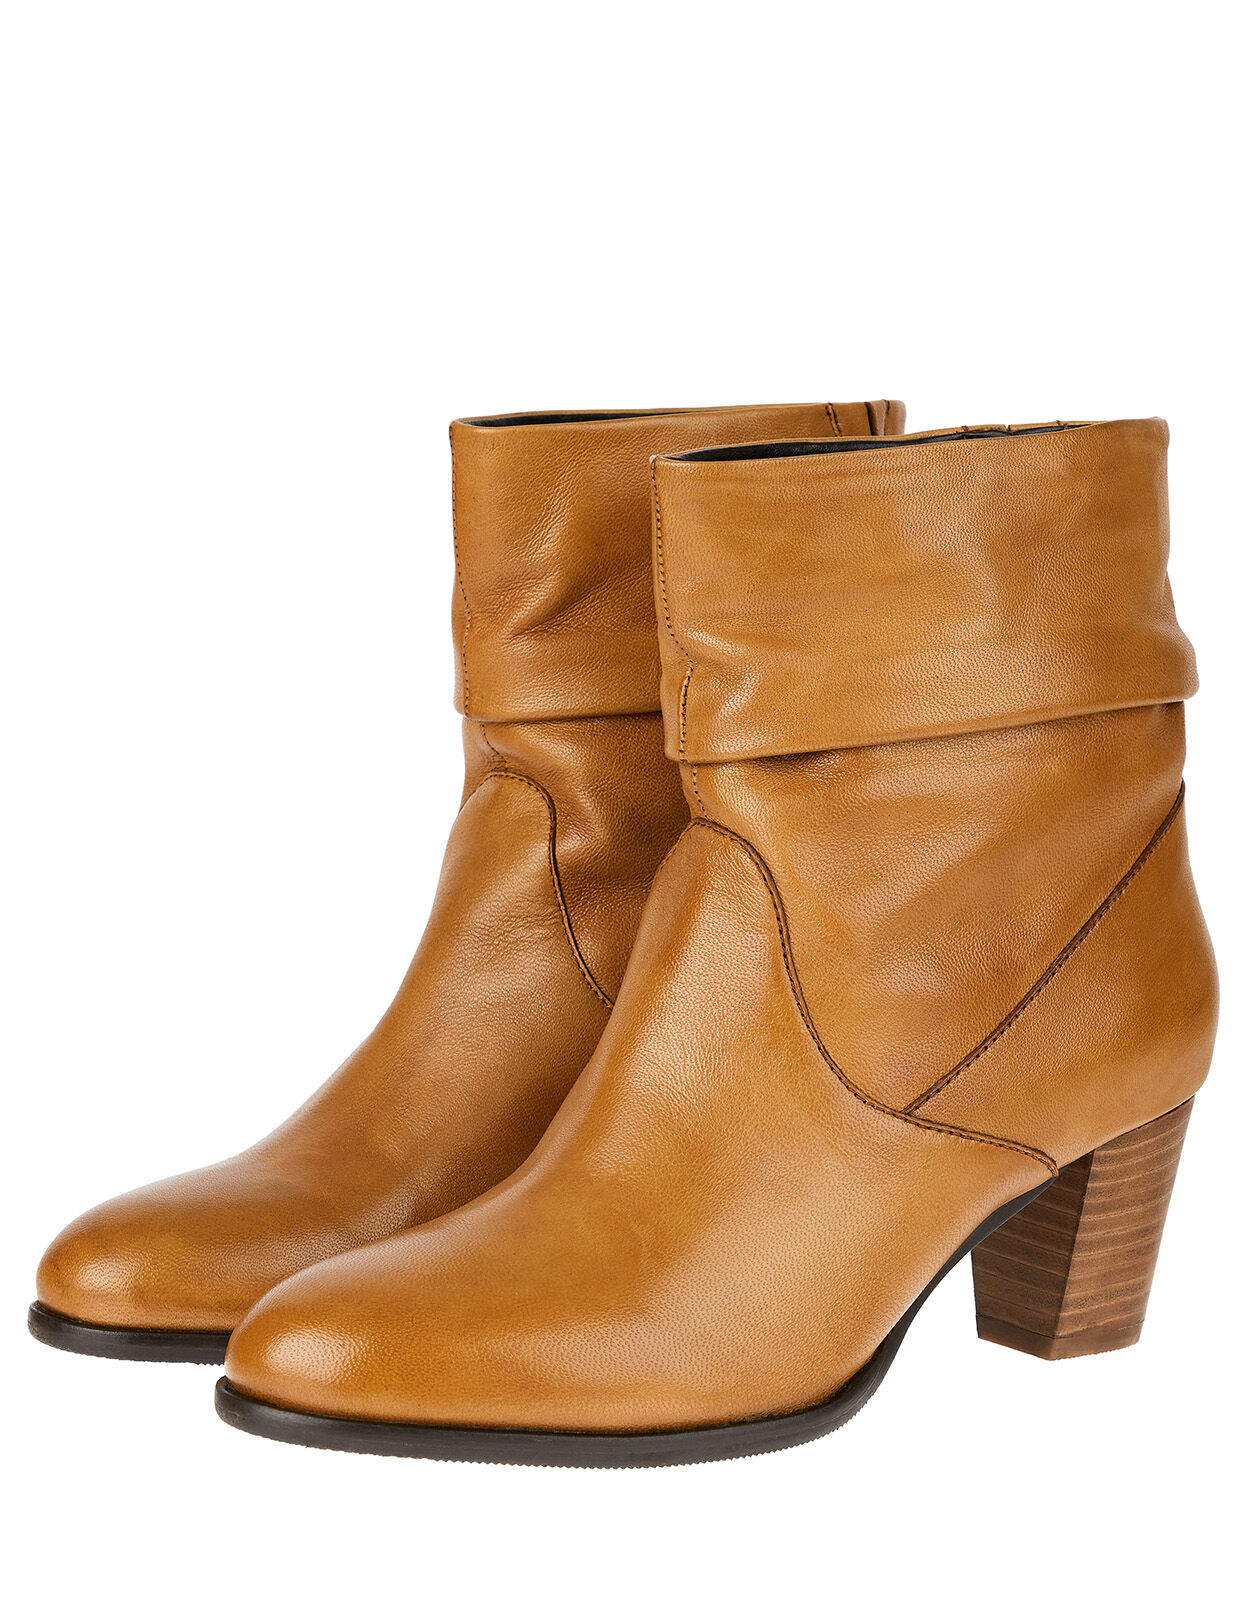 slouch boots ireland